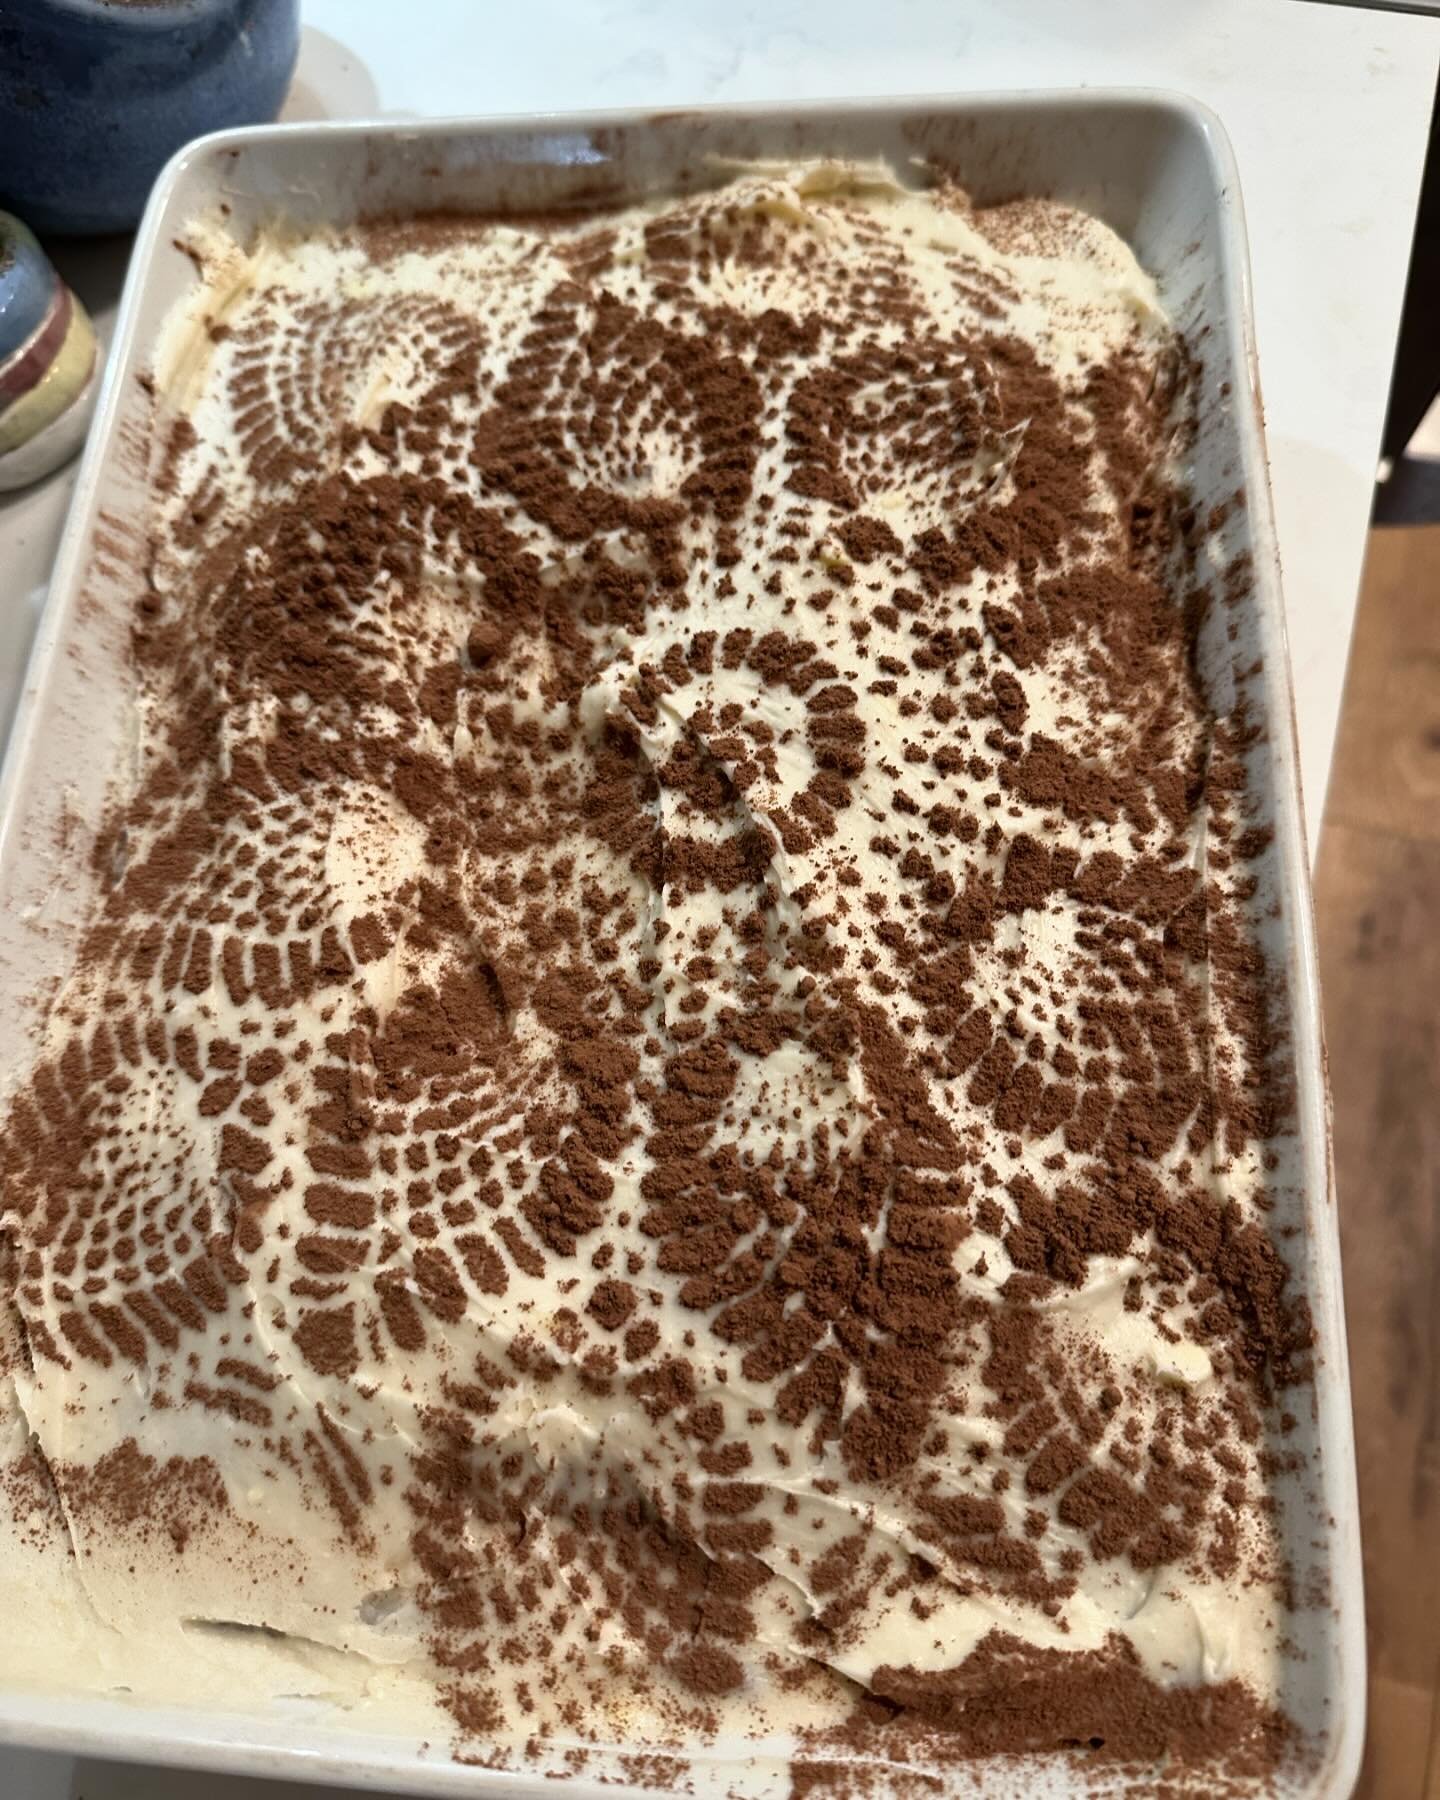 Used over 100 year old doily that was made by my grandmother to decorate this cake!